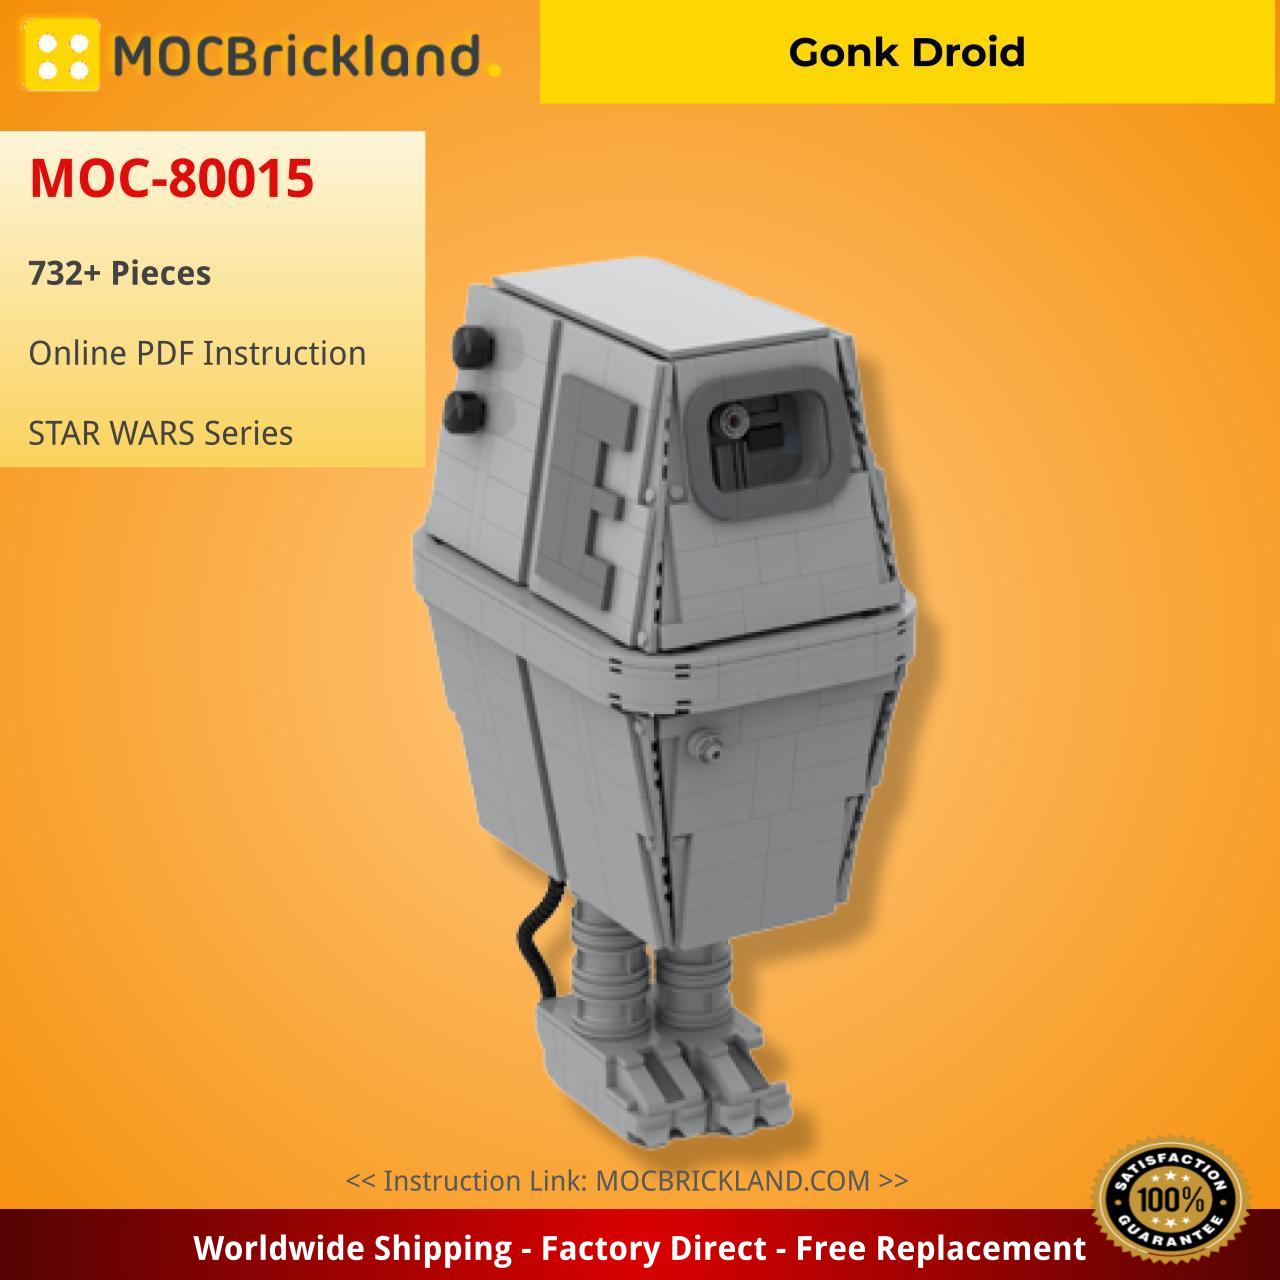 Gonk Droid STAR WARS MOC-80015 by BongoShaftsbury with 732 pieces